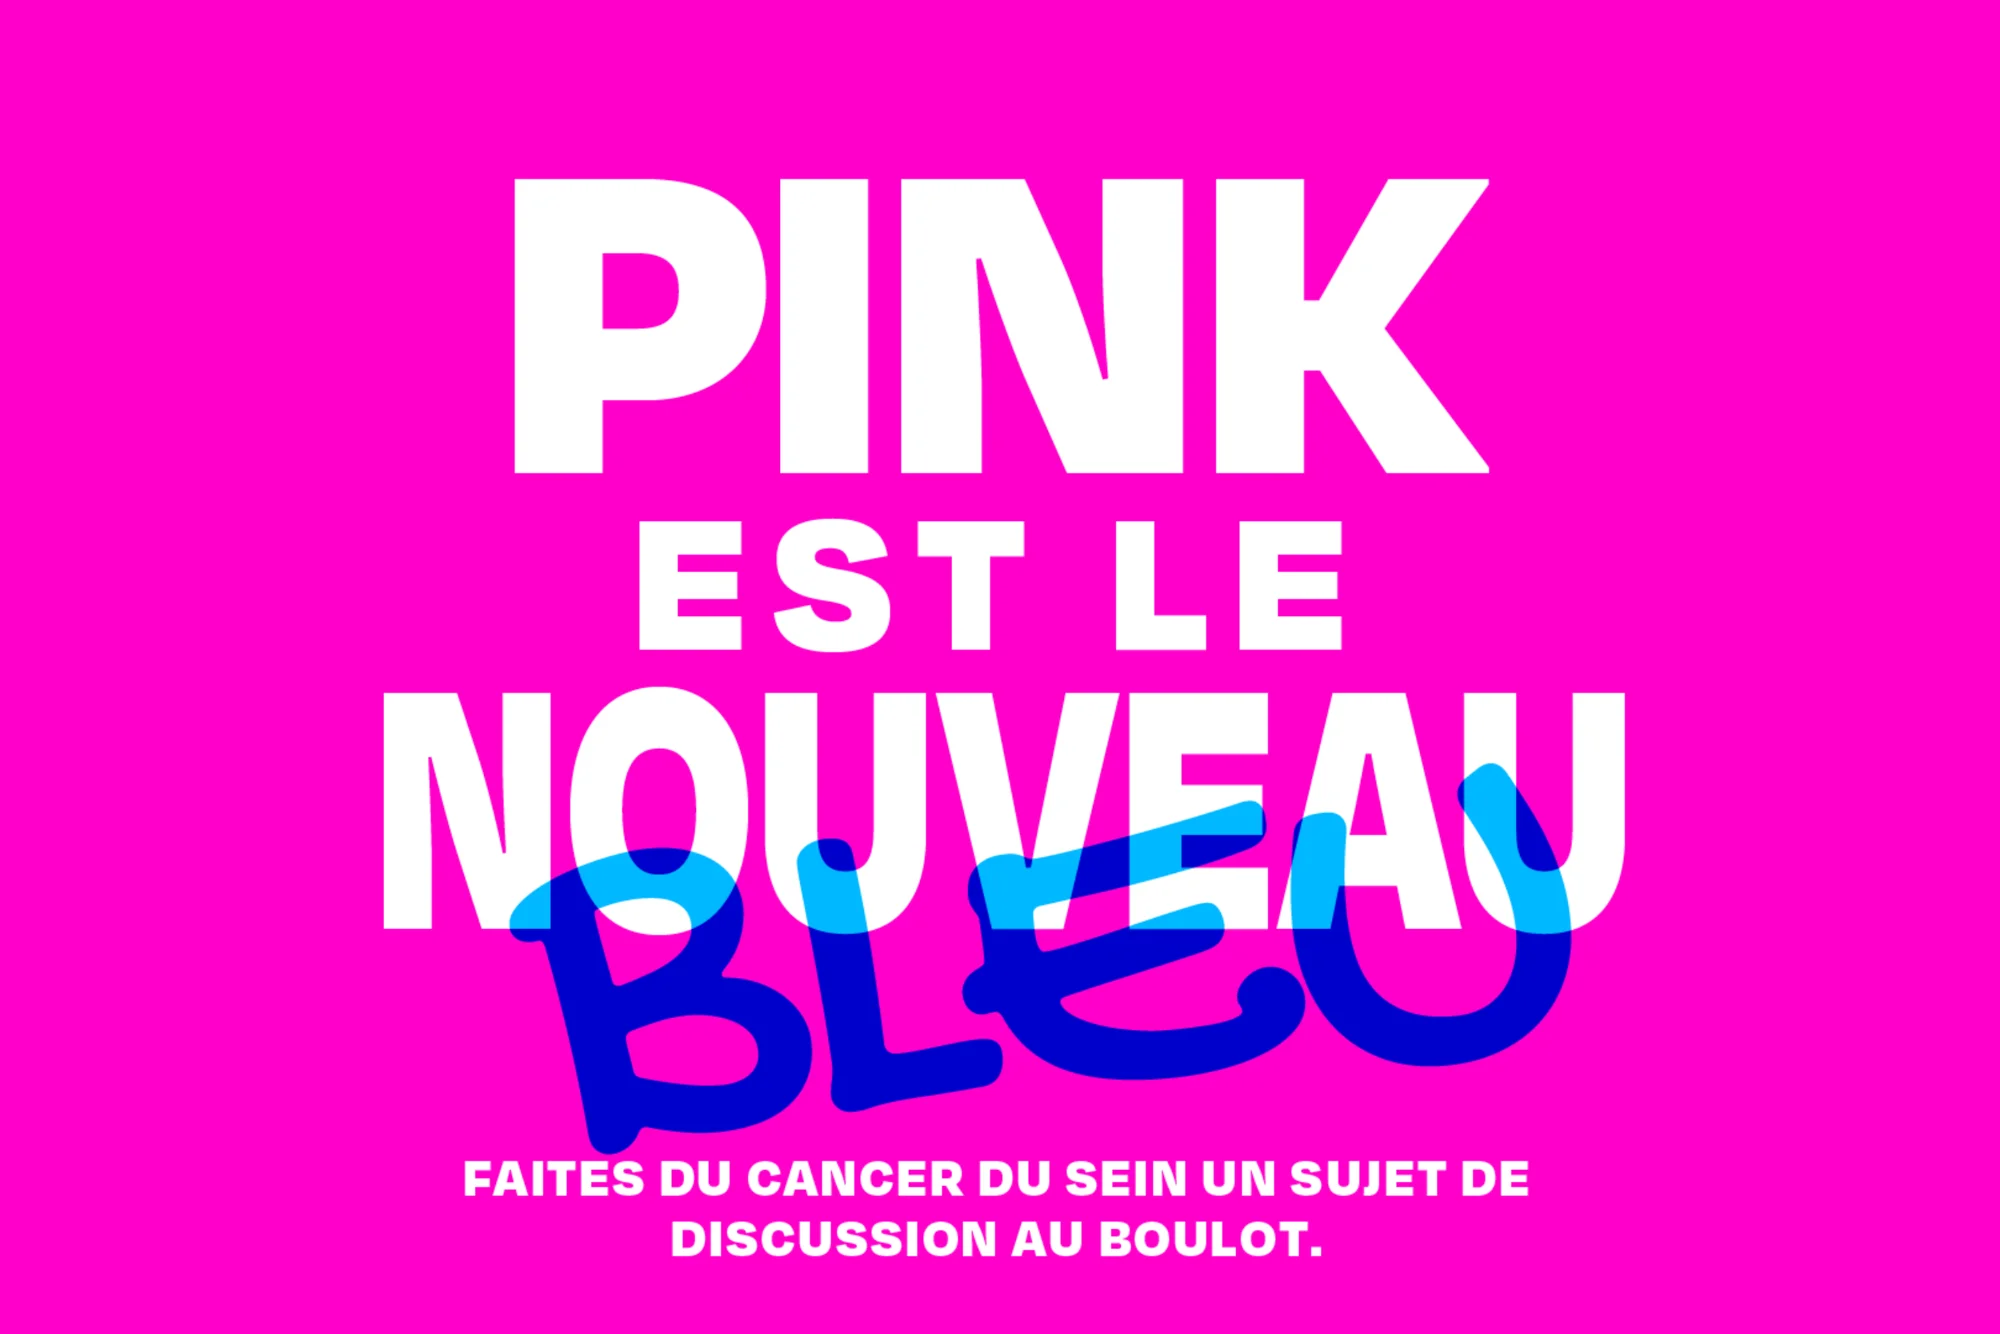 "PINK IS THE NEW BLUE" IS SUPPORTED BY CARREFOUR BELGIUM.